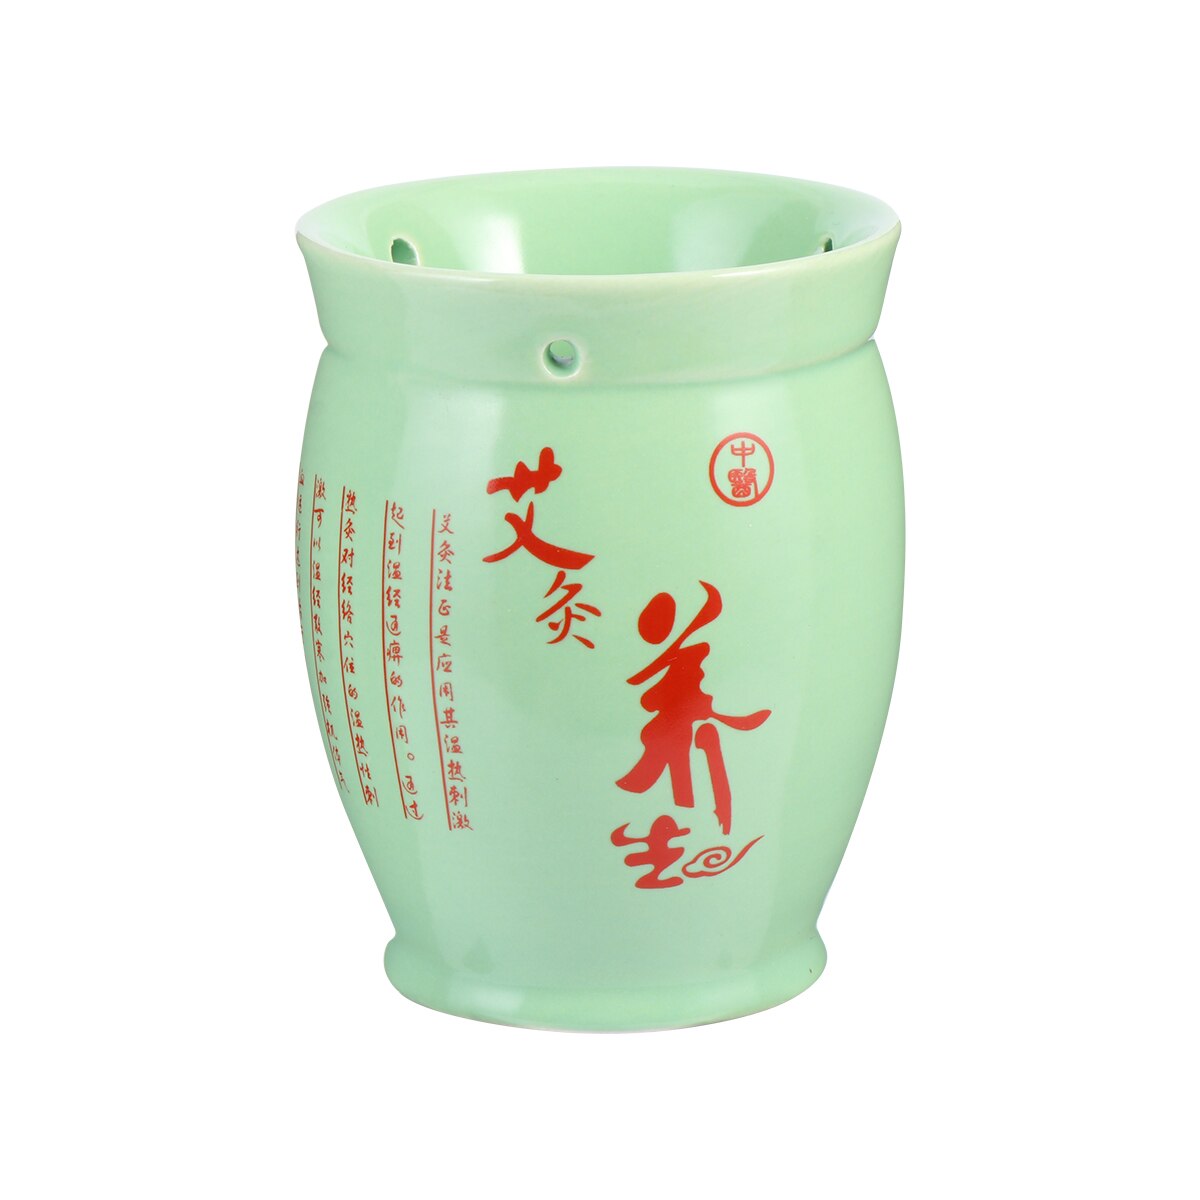 Chinese Geneeskunde Moxa Cup Dubbel Layer Keramische Moxibustion Pot Kan Tin Moxa Cup Massage Voor Spa Home Moxibustion Kan